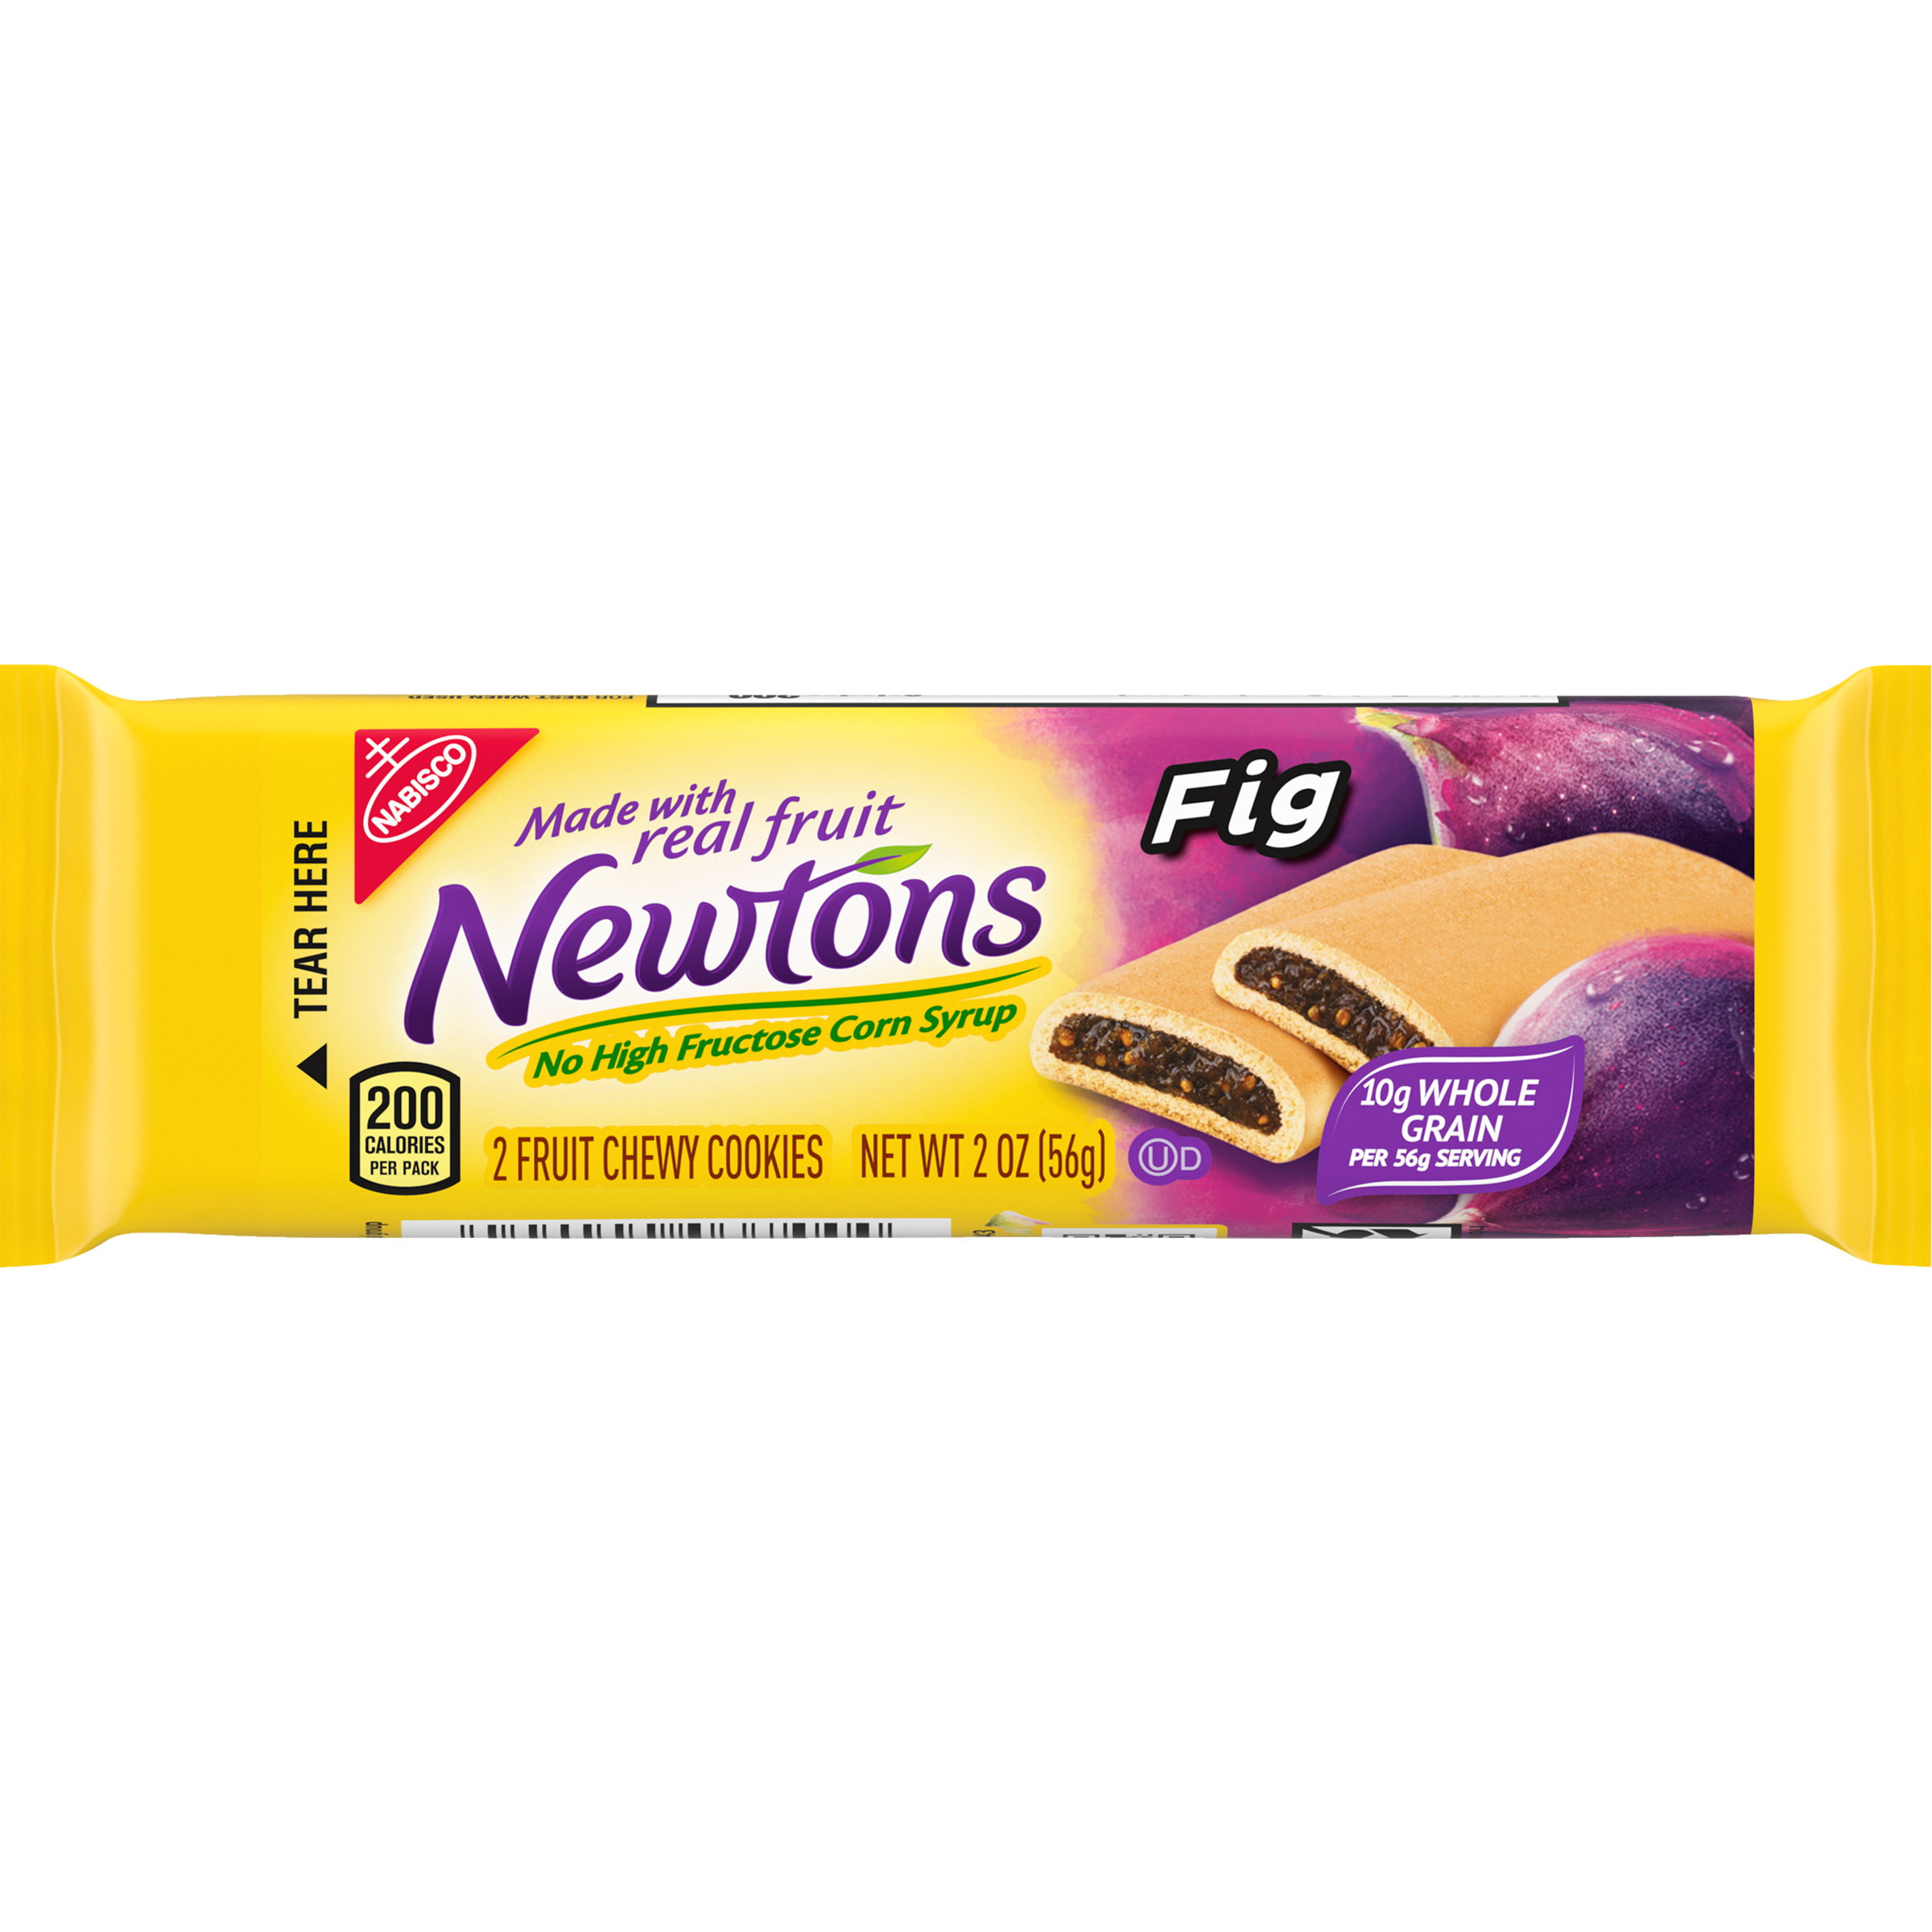 Newtons Soft & Fruit Chewy Fig Cookies, 24 Snack Packs (2 Cookies Per Pack)-thumbnail-3